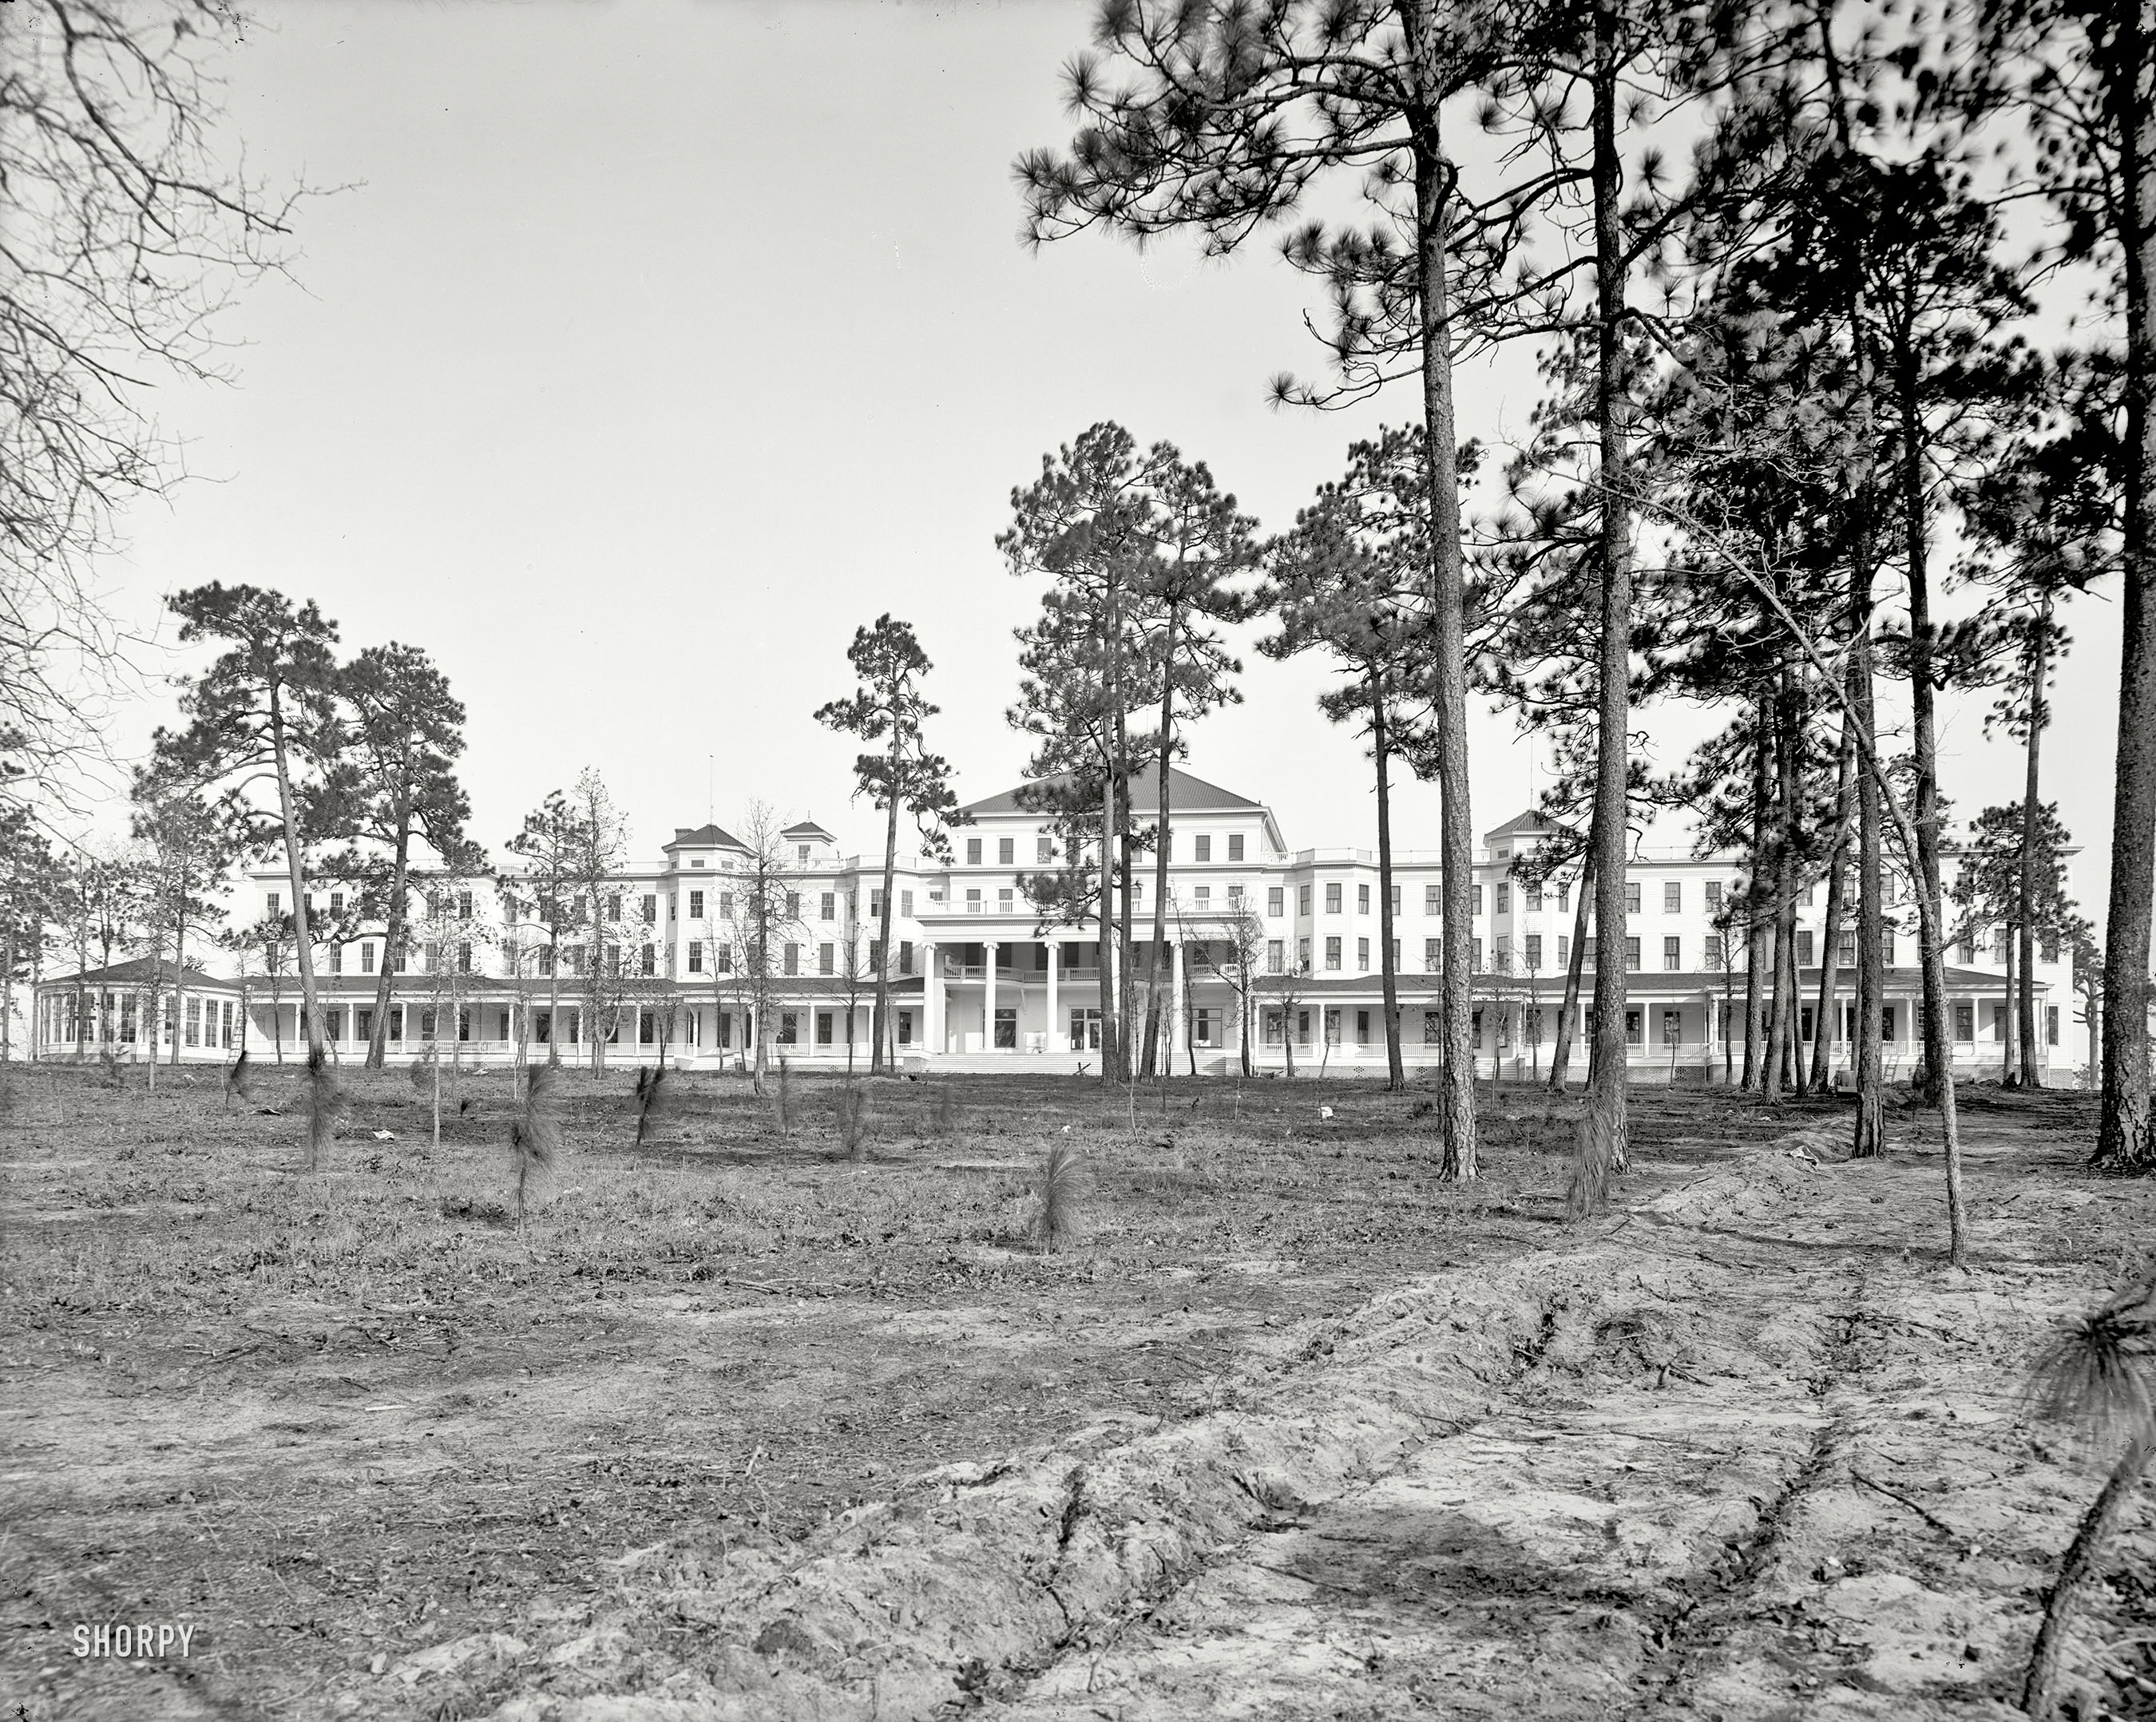 Aiken, South Carolina, circa 1905. "Park in the Pines Hotel." Of the resort's eponymous evergreens, it was claimed that "the exhalations from this tree exert a soothing and purifying effect upon the mucous membrane of the respiratory passages." At least until the place burned down in 1913. View full size.